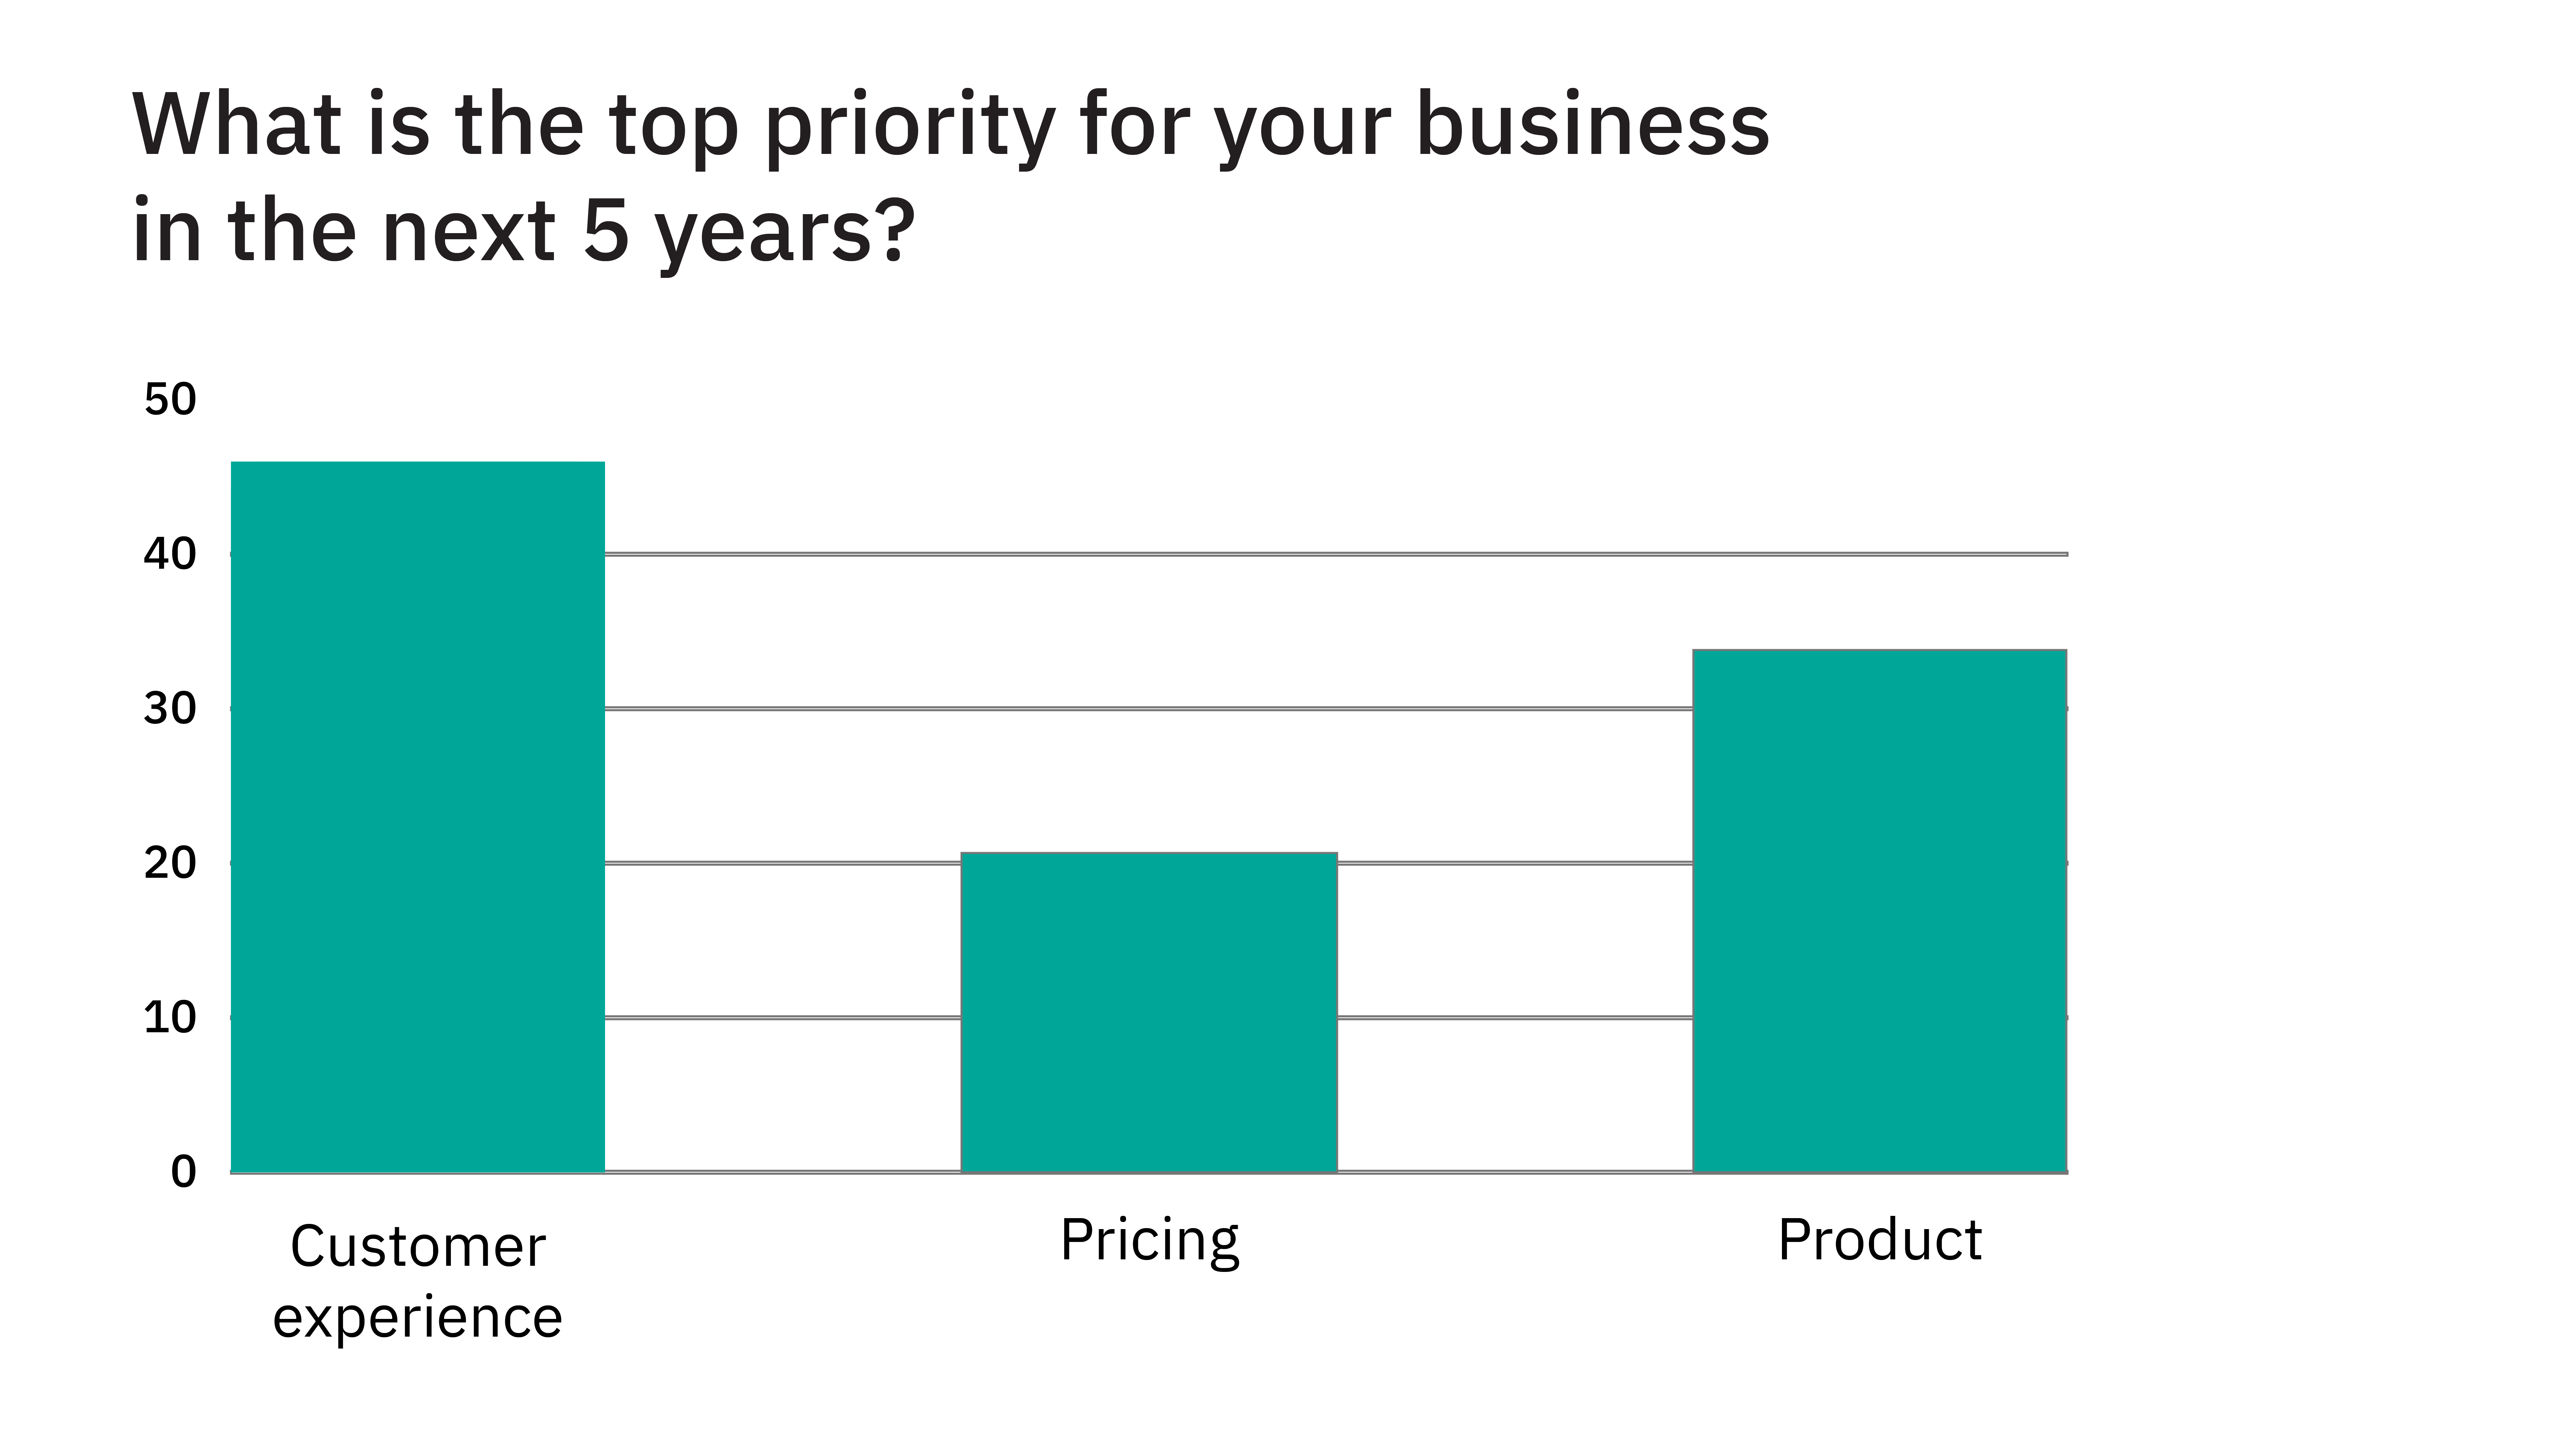 What is the top priority for your business in the next 5 years